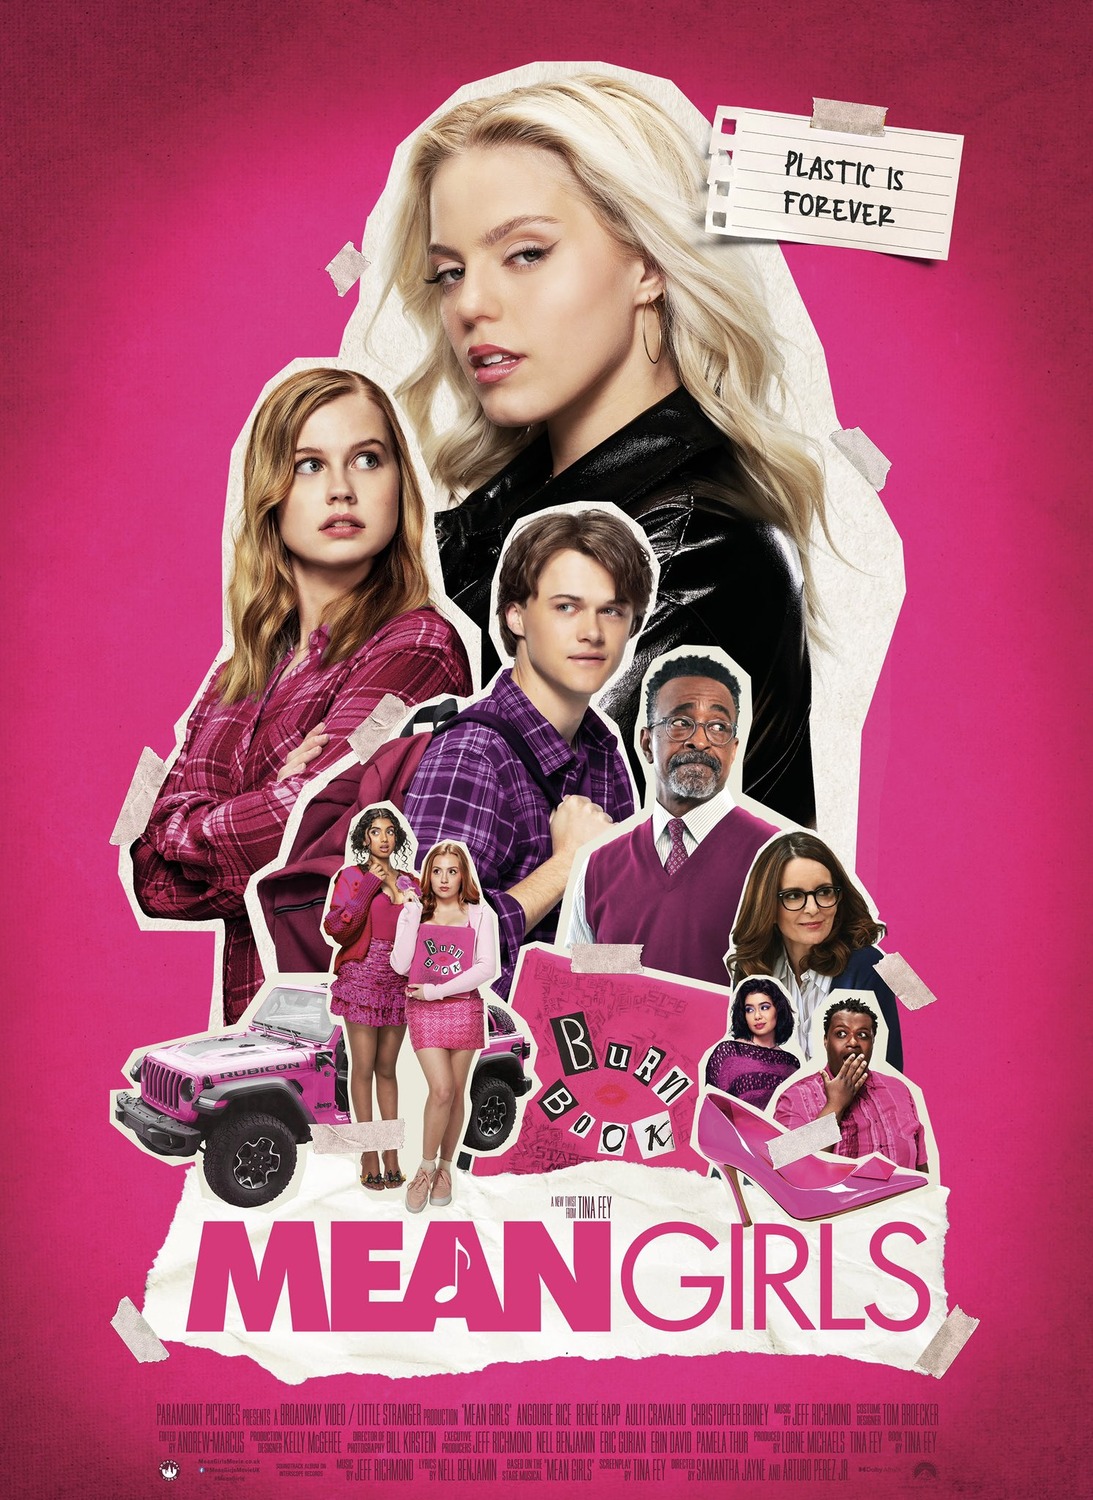 “Mean Girls” is a musical afraid of being a musical